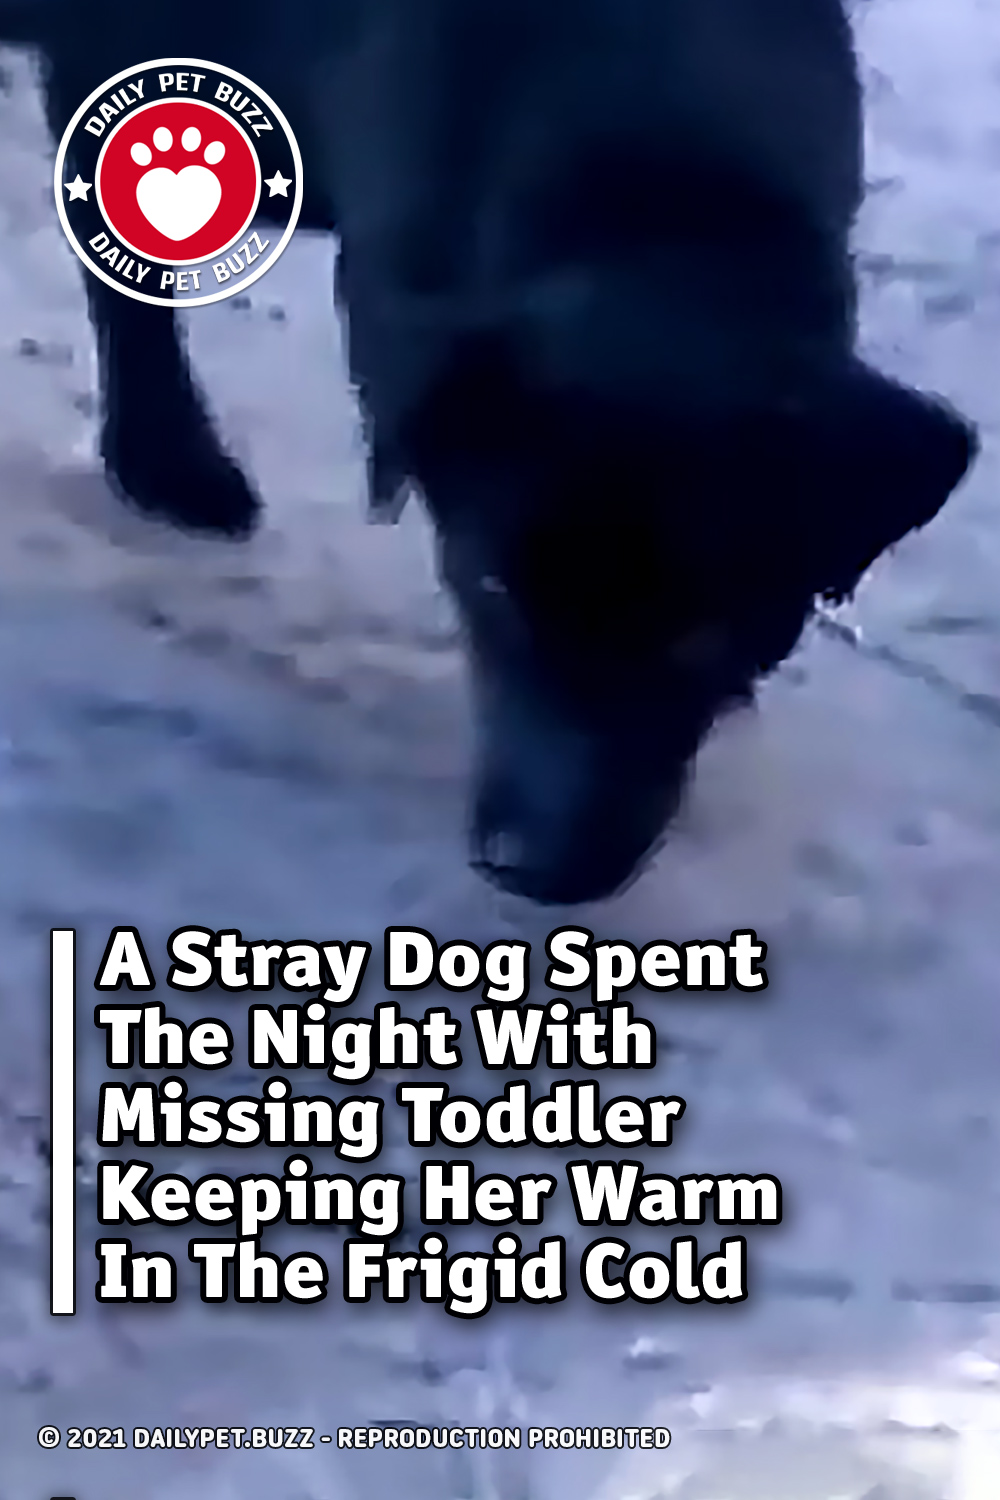 A Stray Dog Spent The Night With Missing Toddler Keeping Her Warm In The Frigid Cold